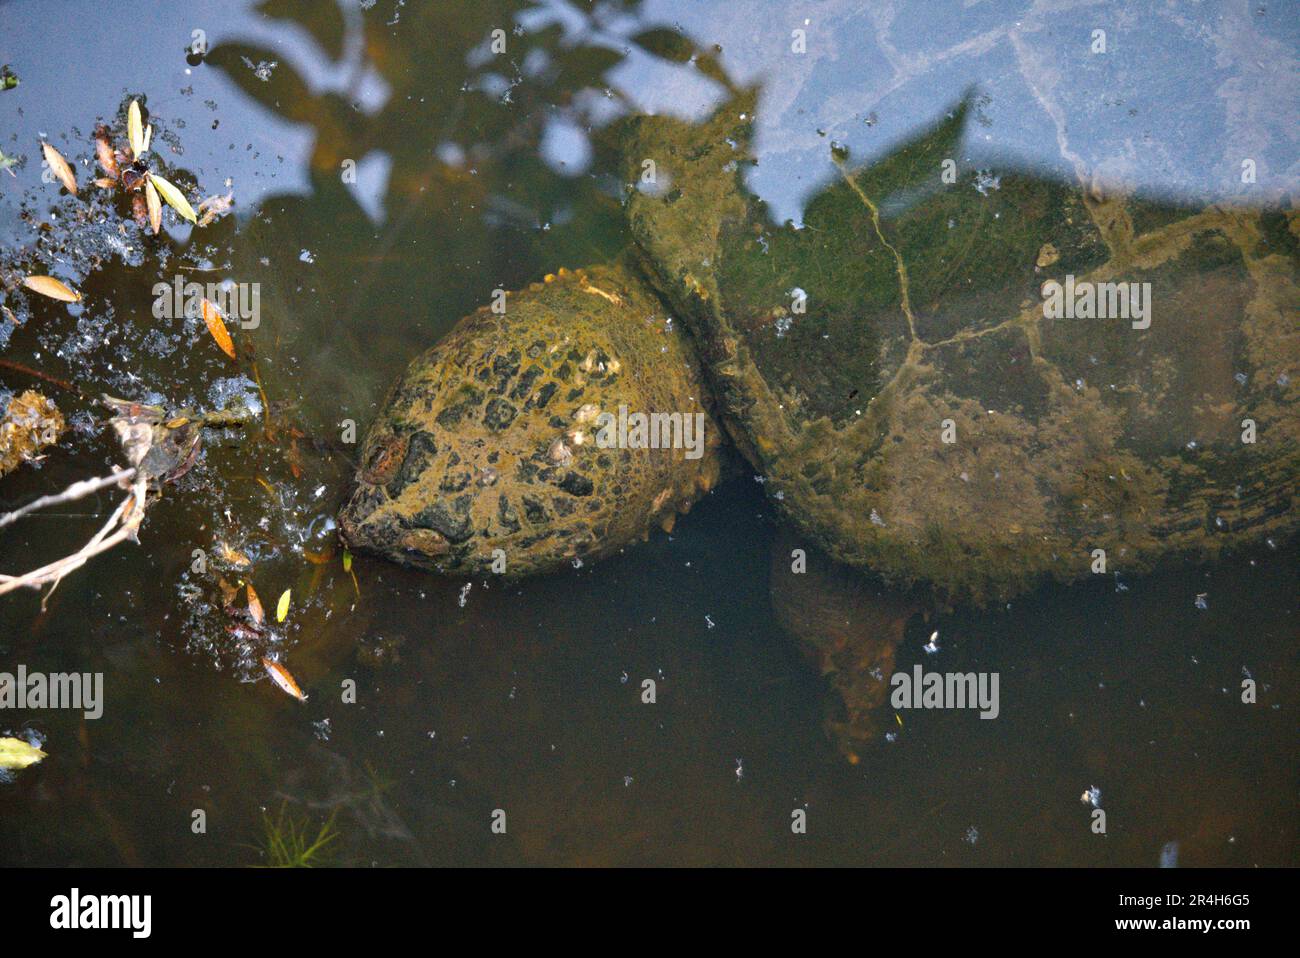 Snapping Turtle in a Pennsylvania stream Stock Photo